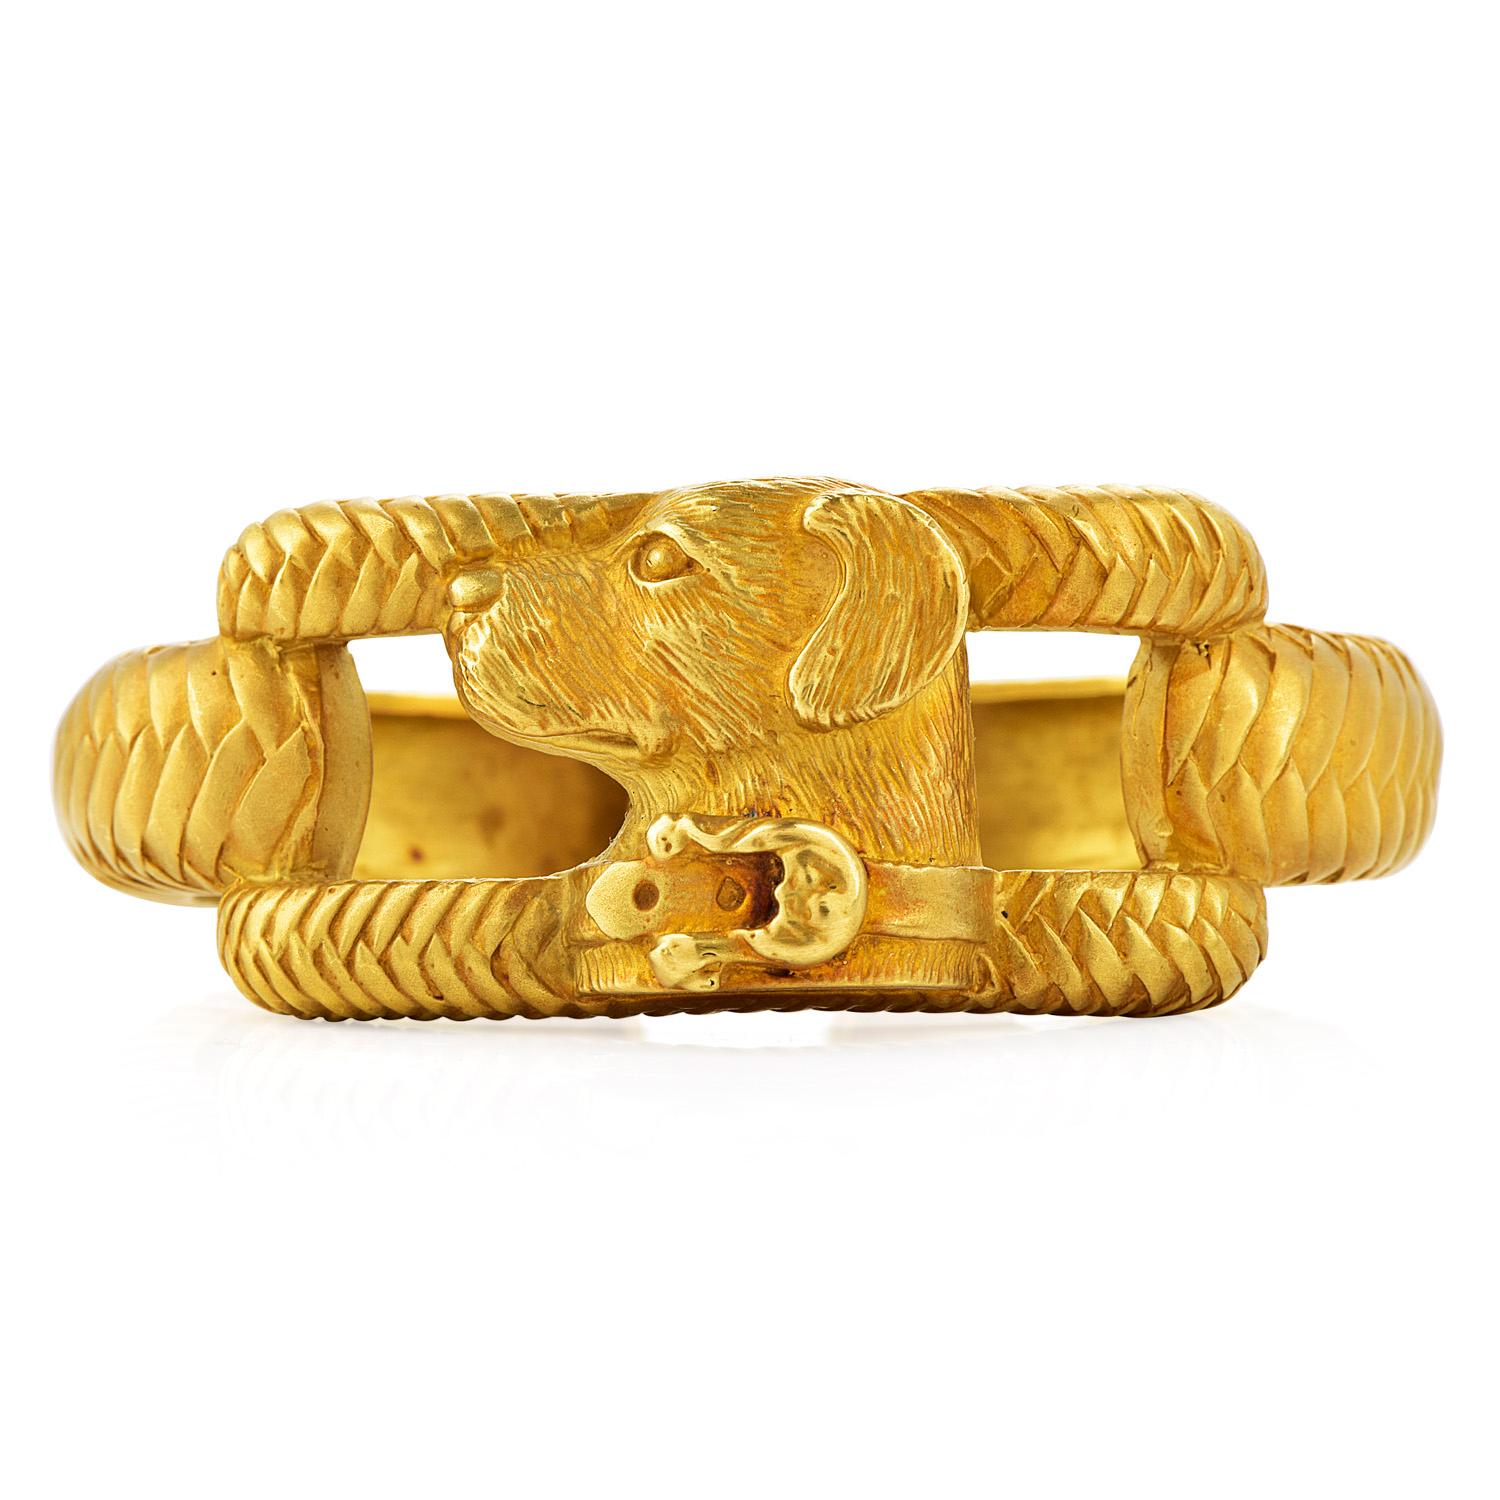 Rare Collectable Kieselstein Cord 18K Gold Labrador Retriever Dog Hinged Cuff Bangle Bracelet

Circa 1980's collection from Barry Kieselstein Cord

This beautiful Cuff bracelet featuring a carefully carved dog center piece and an engraved design